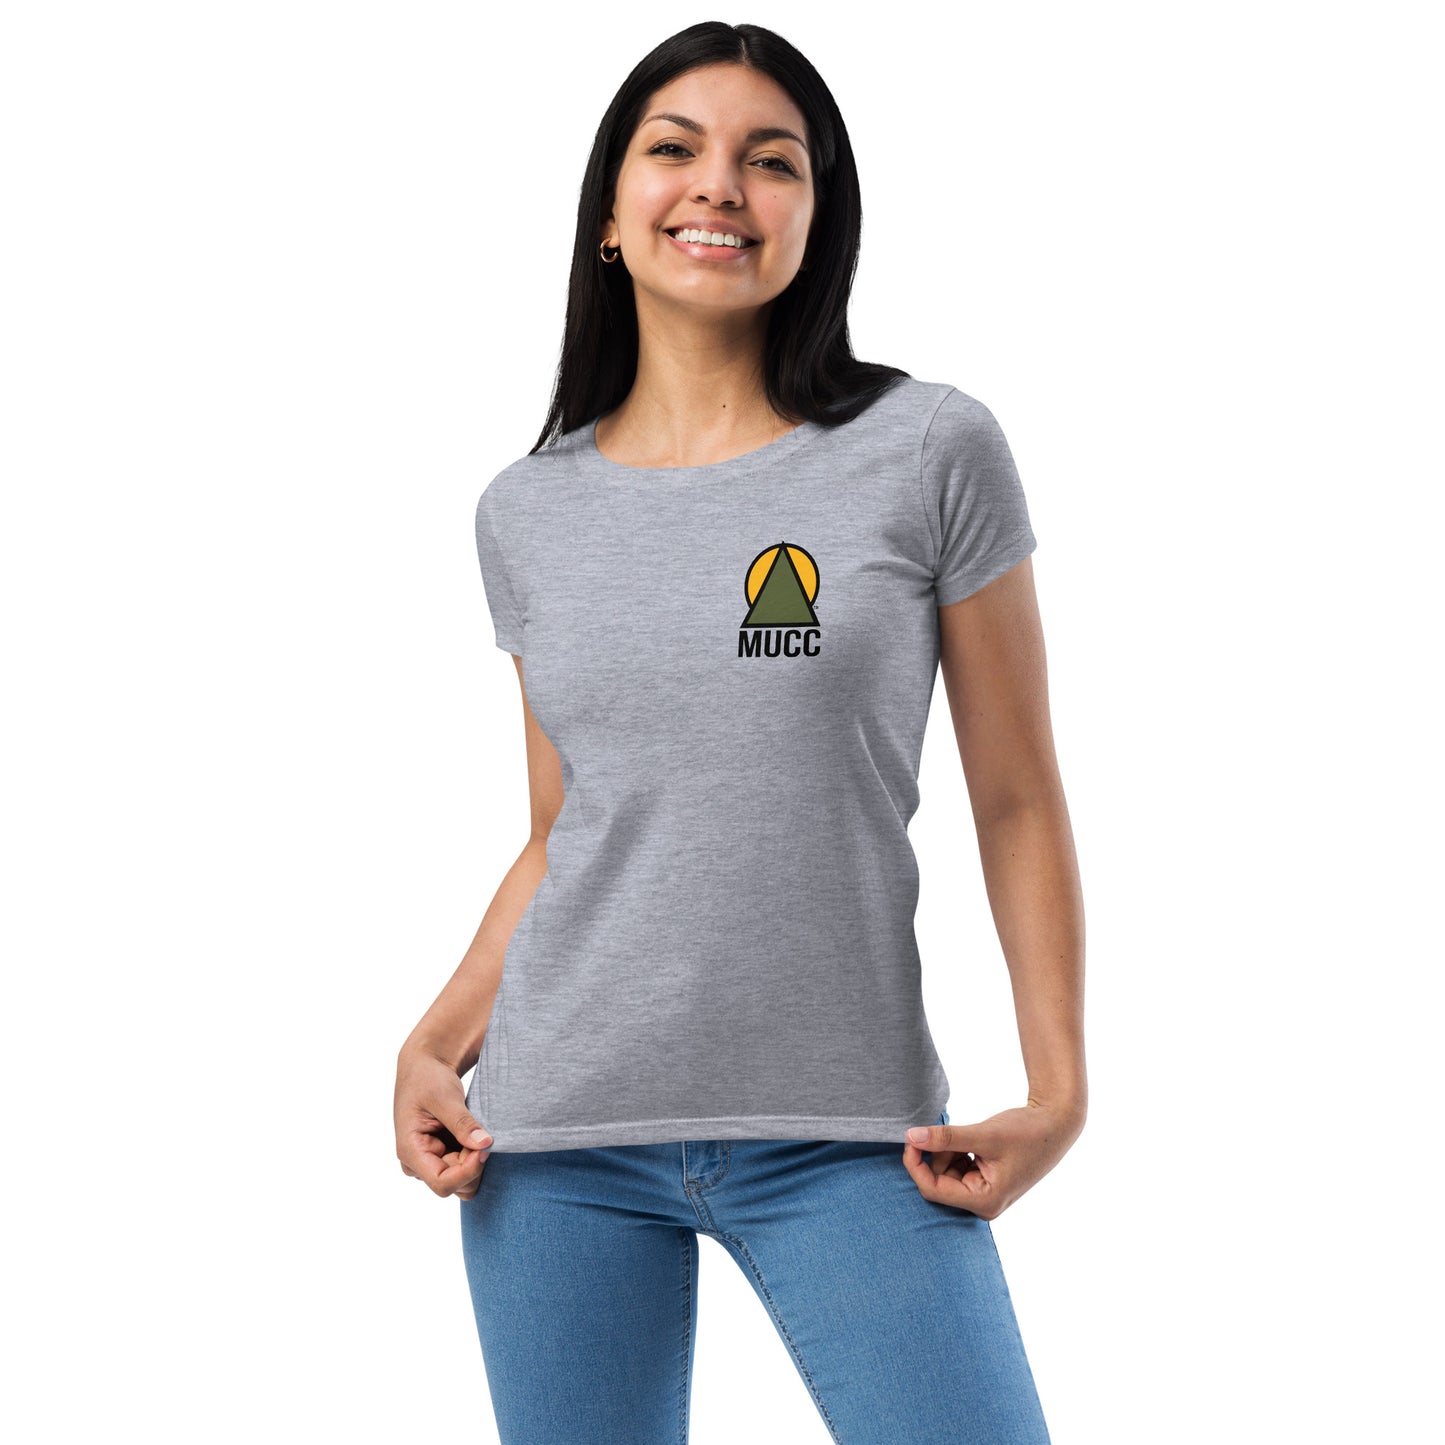 Women’s fitted t-shirt